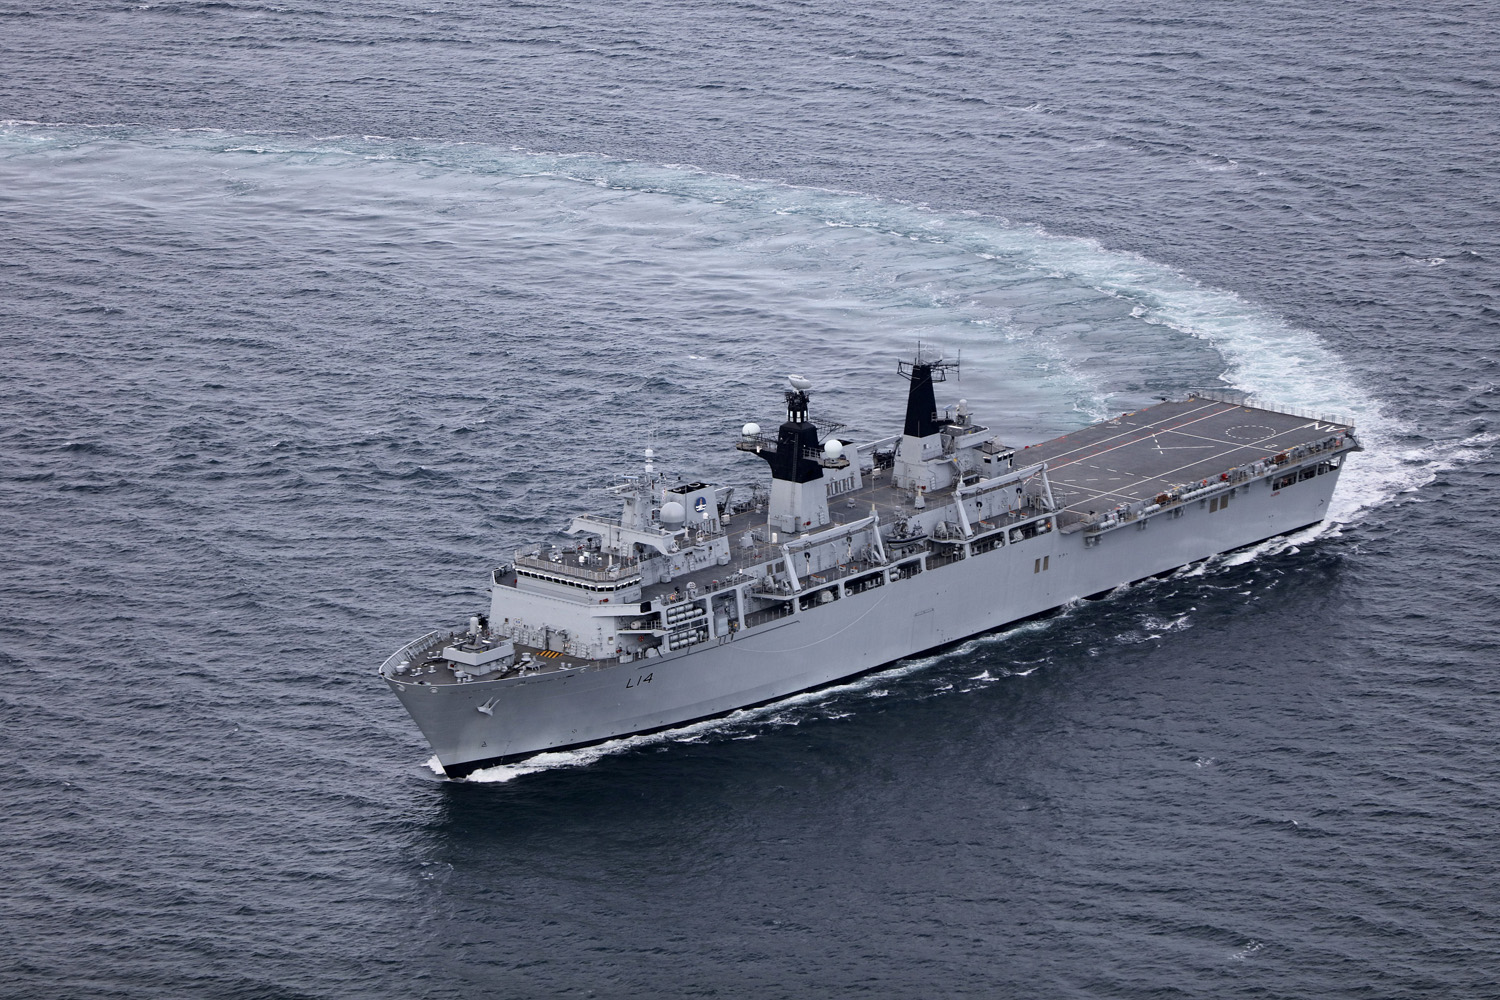 HMS Albion, an amphibious warfare ship, is seen sailing blue-grey waters. The photo appears to have been taken from above the waters, possible from an aircraft. The ship is painted grey and has "L14" painted on its side in black.